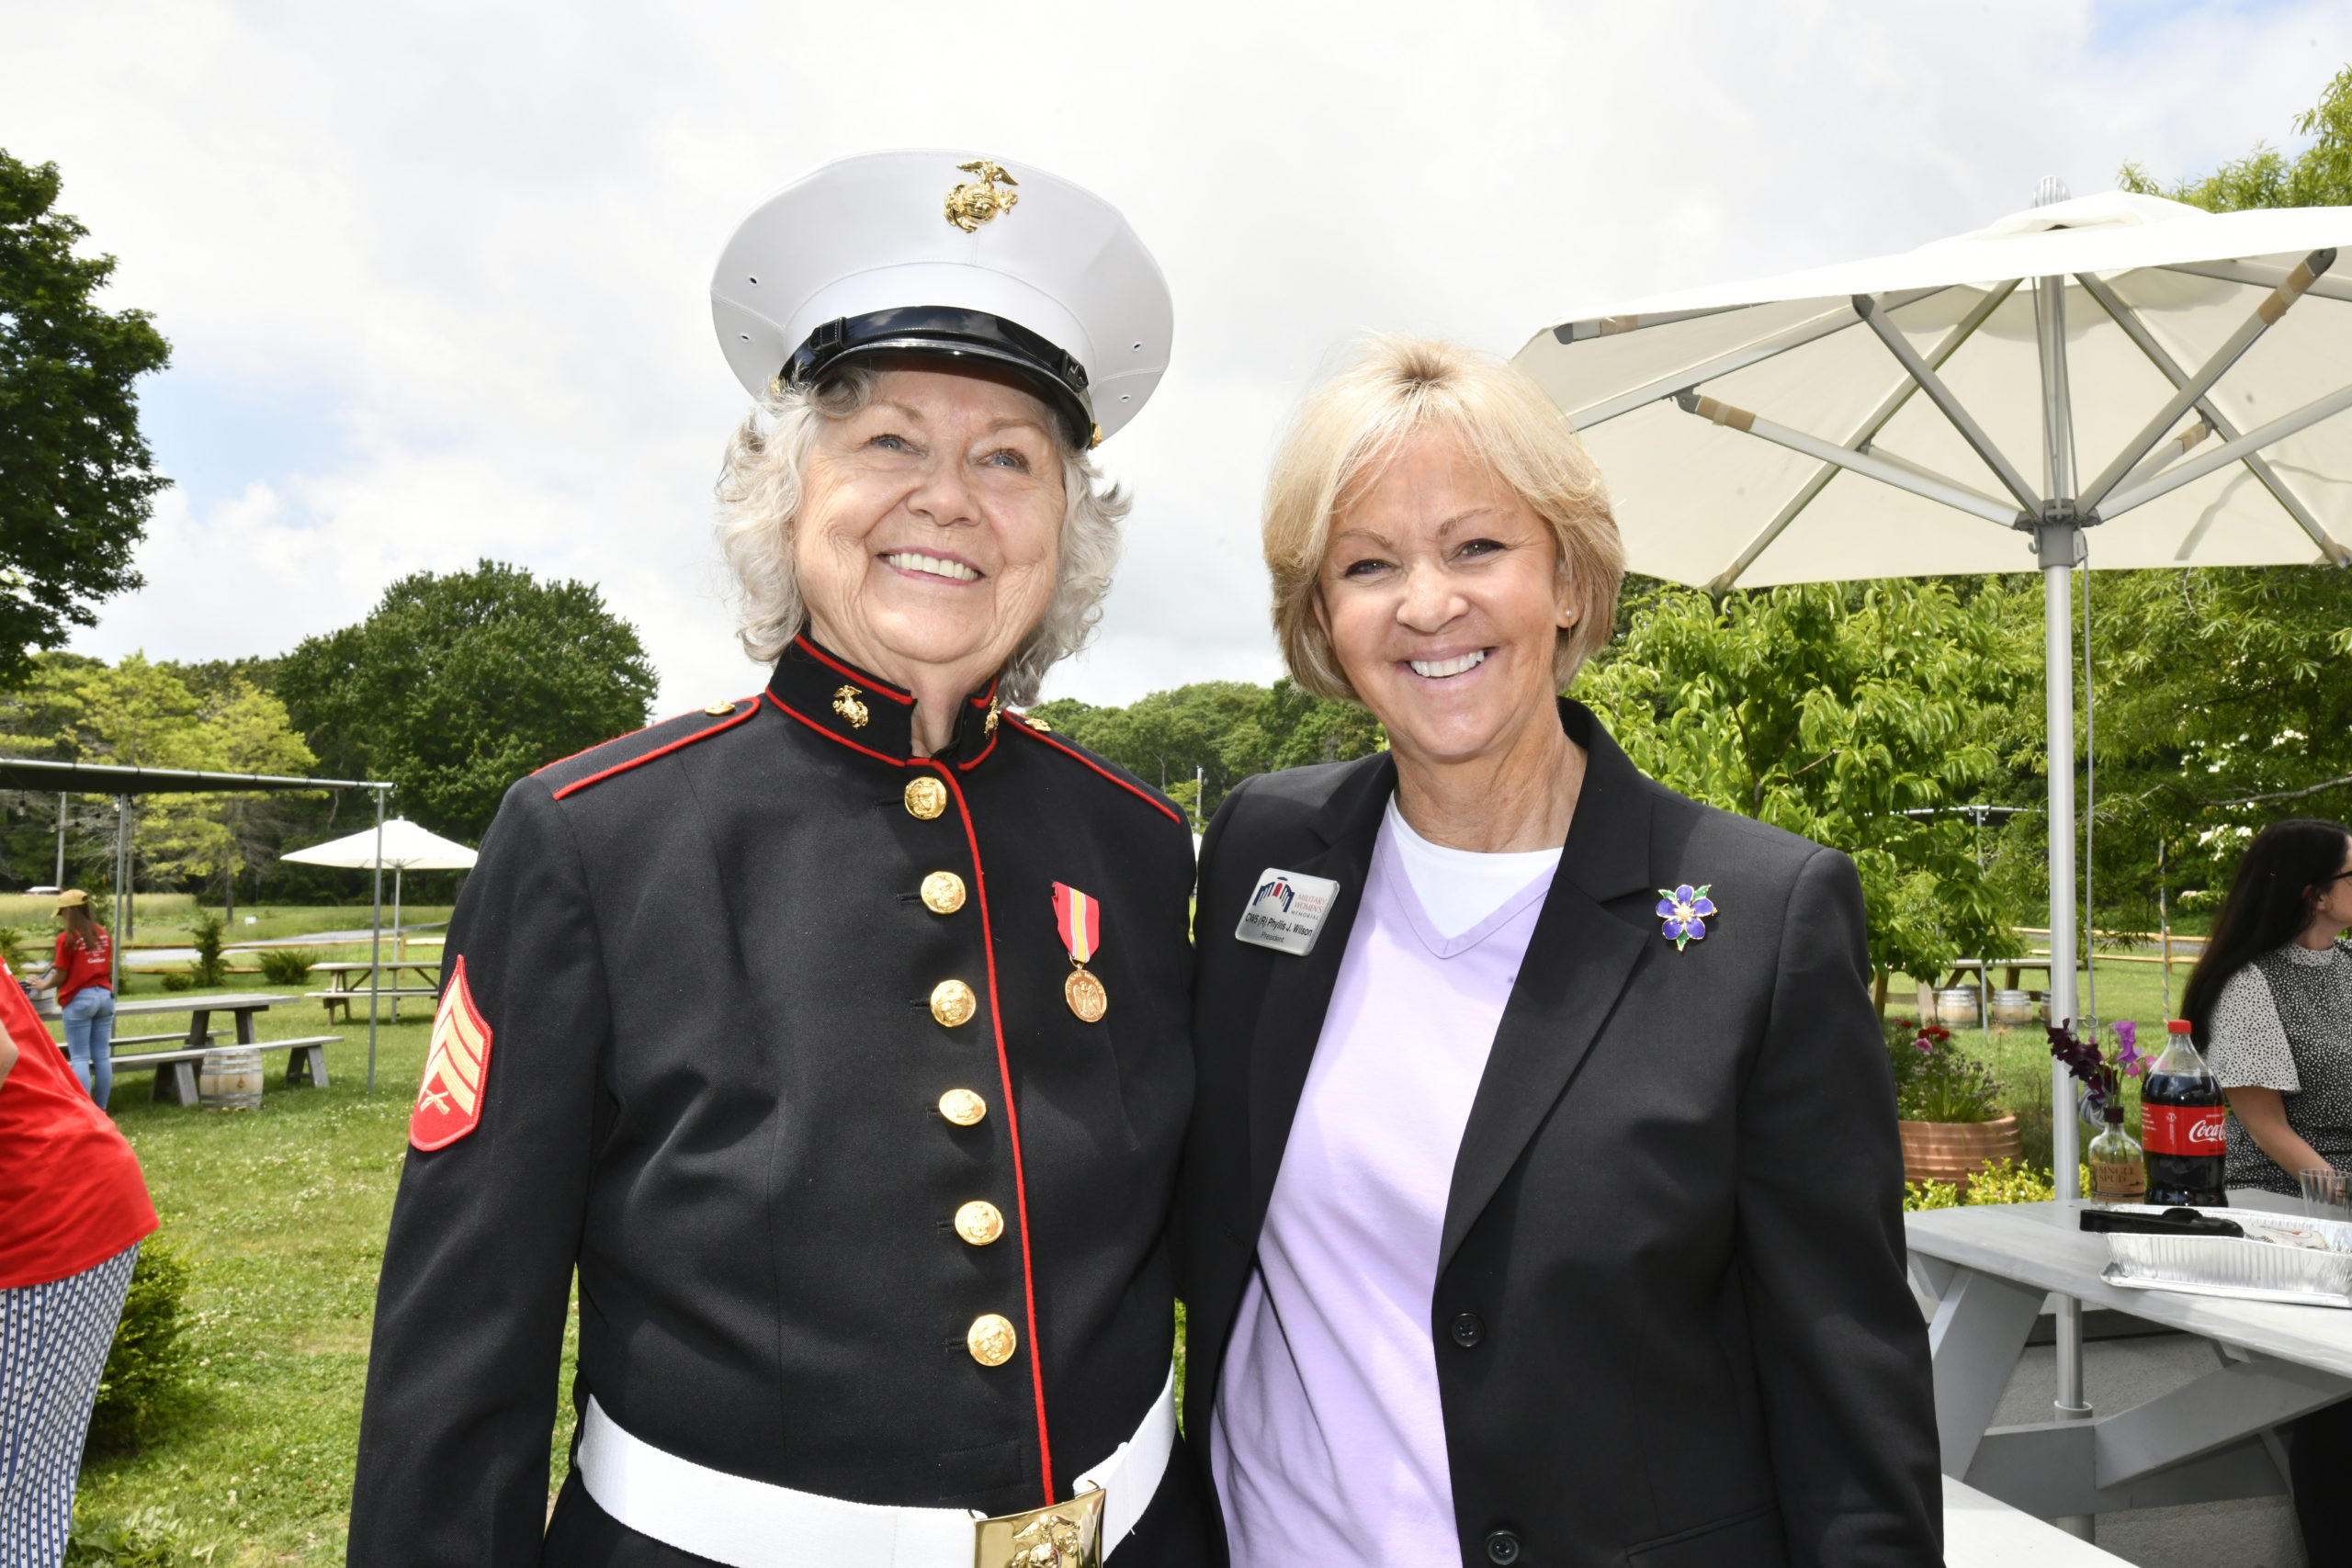 Sgt. Evelyn Kandel, left, and Phillis J. Wilson, President of the Women in Military Service for American Foundation at Sagaponack Distillery on June 15. Sgt. Kandel, of Glen Cove, served in the  U.S. Marine Corps Women’s Reserve during the Korean War from 1951 to 1953. During her time serving, Sgt. Kandel was asked to pose for recruiting materials for the U.S. Marine Corps Women’s Reserve. She was given a uniform to wear for the photographs, but the Marines took it back afterward. Honor Flight Long Island and Col. Frank Tauches, U.S. Marine Corps, retired made sure that Sgt. Kandel finally got the uniform she earned and a ceremony honoring her and her service.  Sgt. Kandel is also Poet Laureate of Nassau County.  DANA SHAW